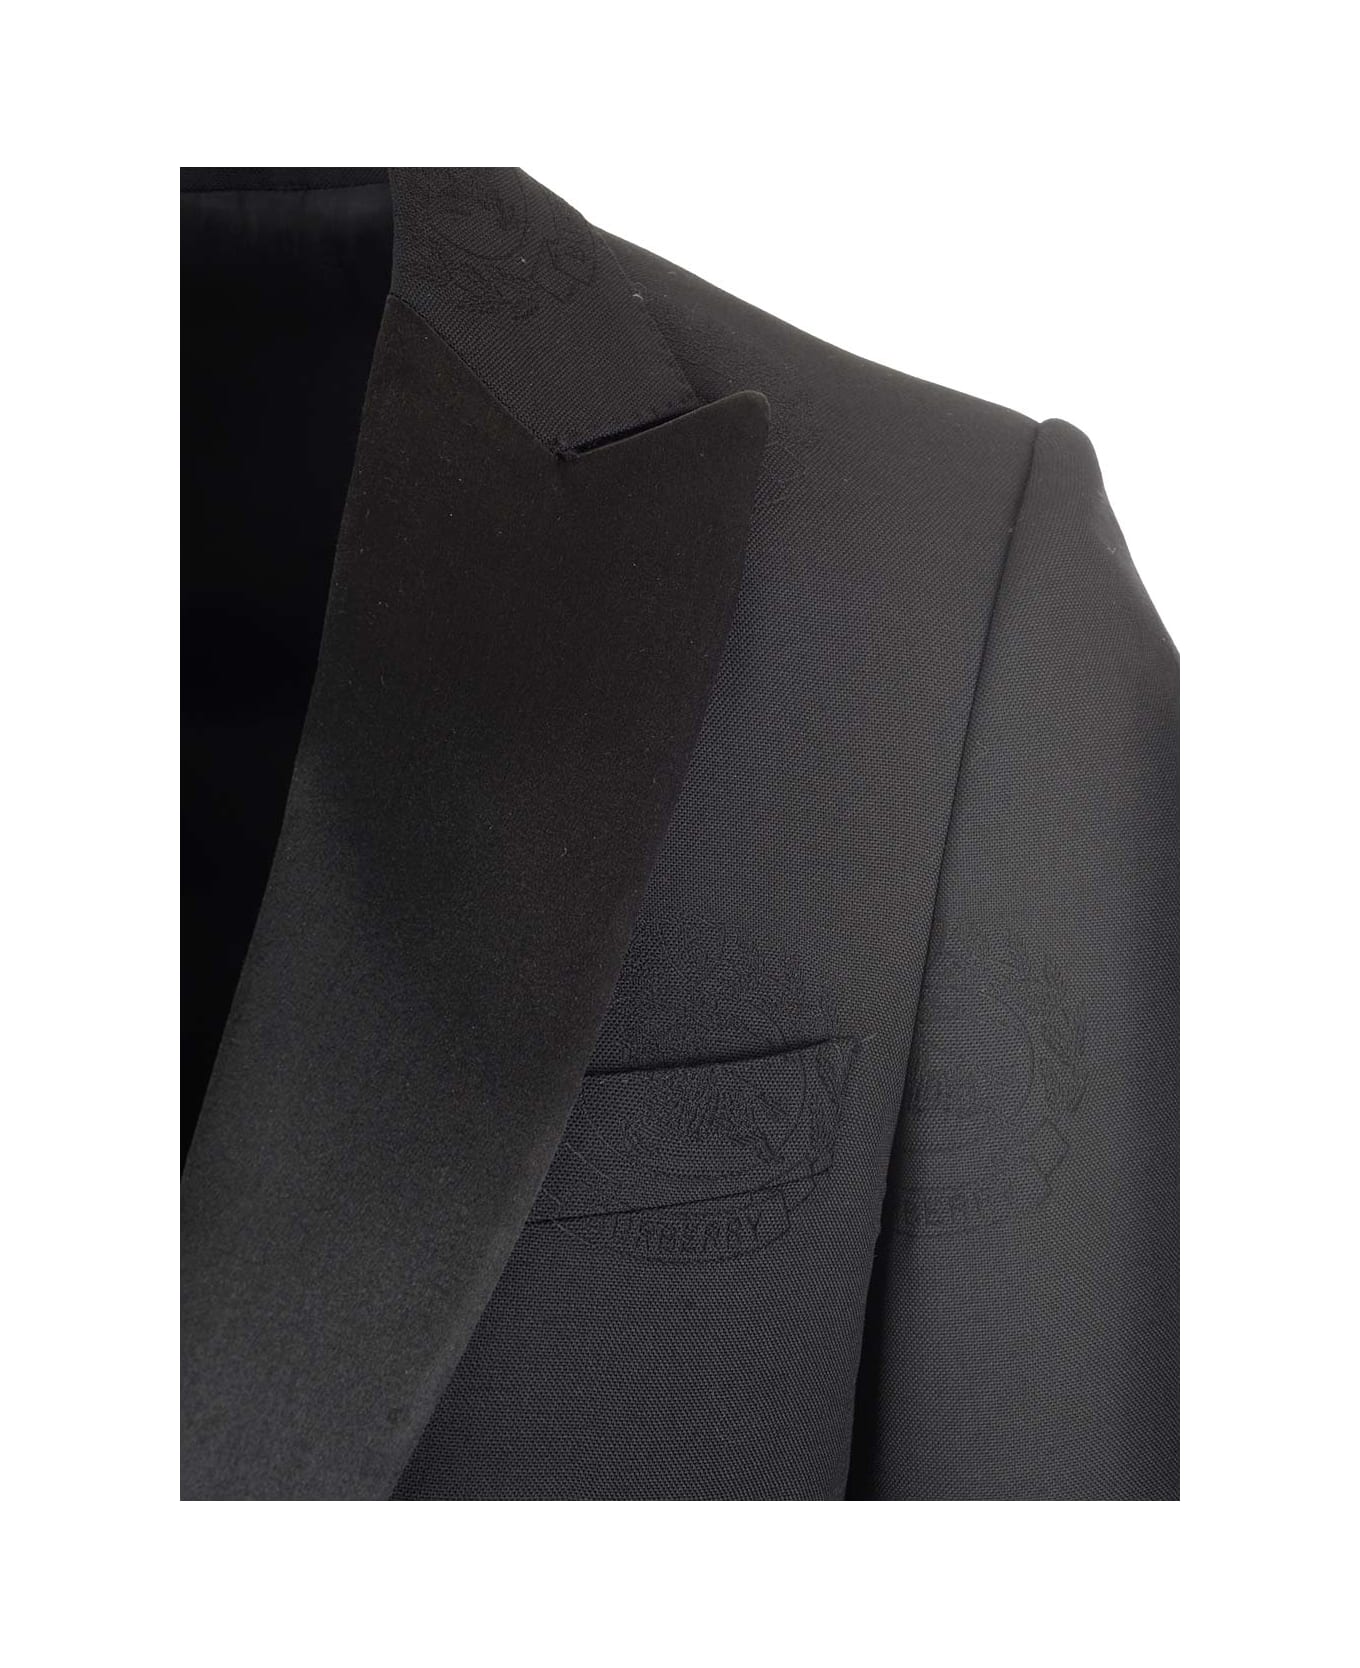 Burberry Black Single-breasted Tailored Jacket - Black ブレザー